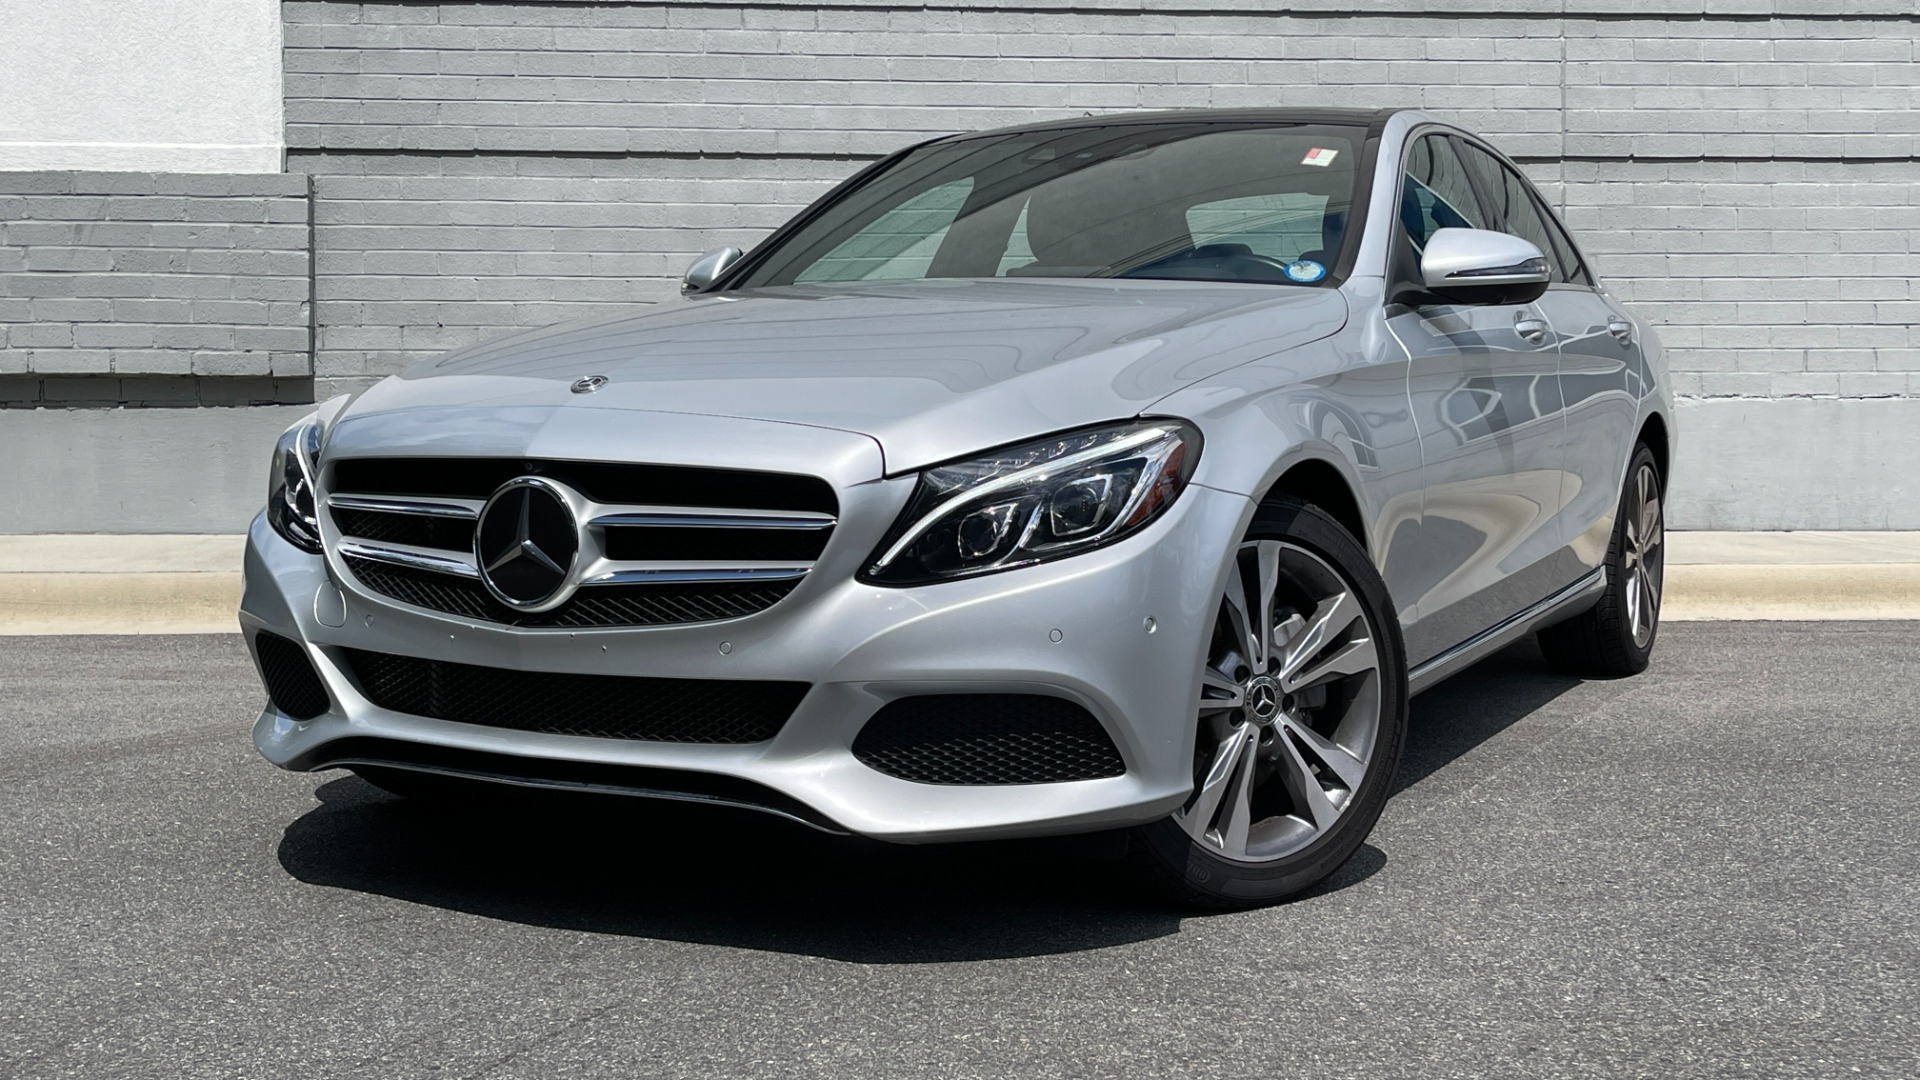 Used 2018 Mercedes-Benz C-Class C300 / PANORAMIC / HEADS UP DISPLAY / ADVANCED LIGHTING / PREMIUM ASSISTANC for sale $30,995 at Formula Imports in Charlotte NC 28227 1